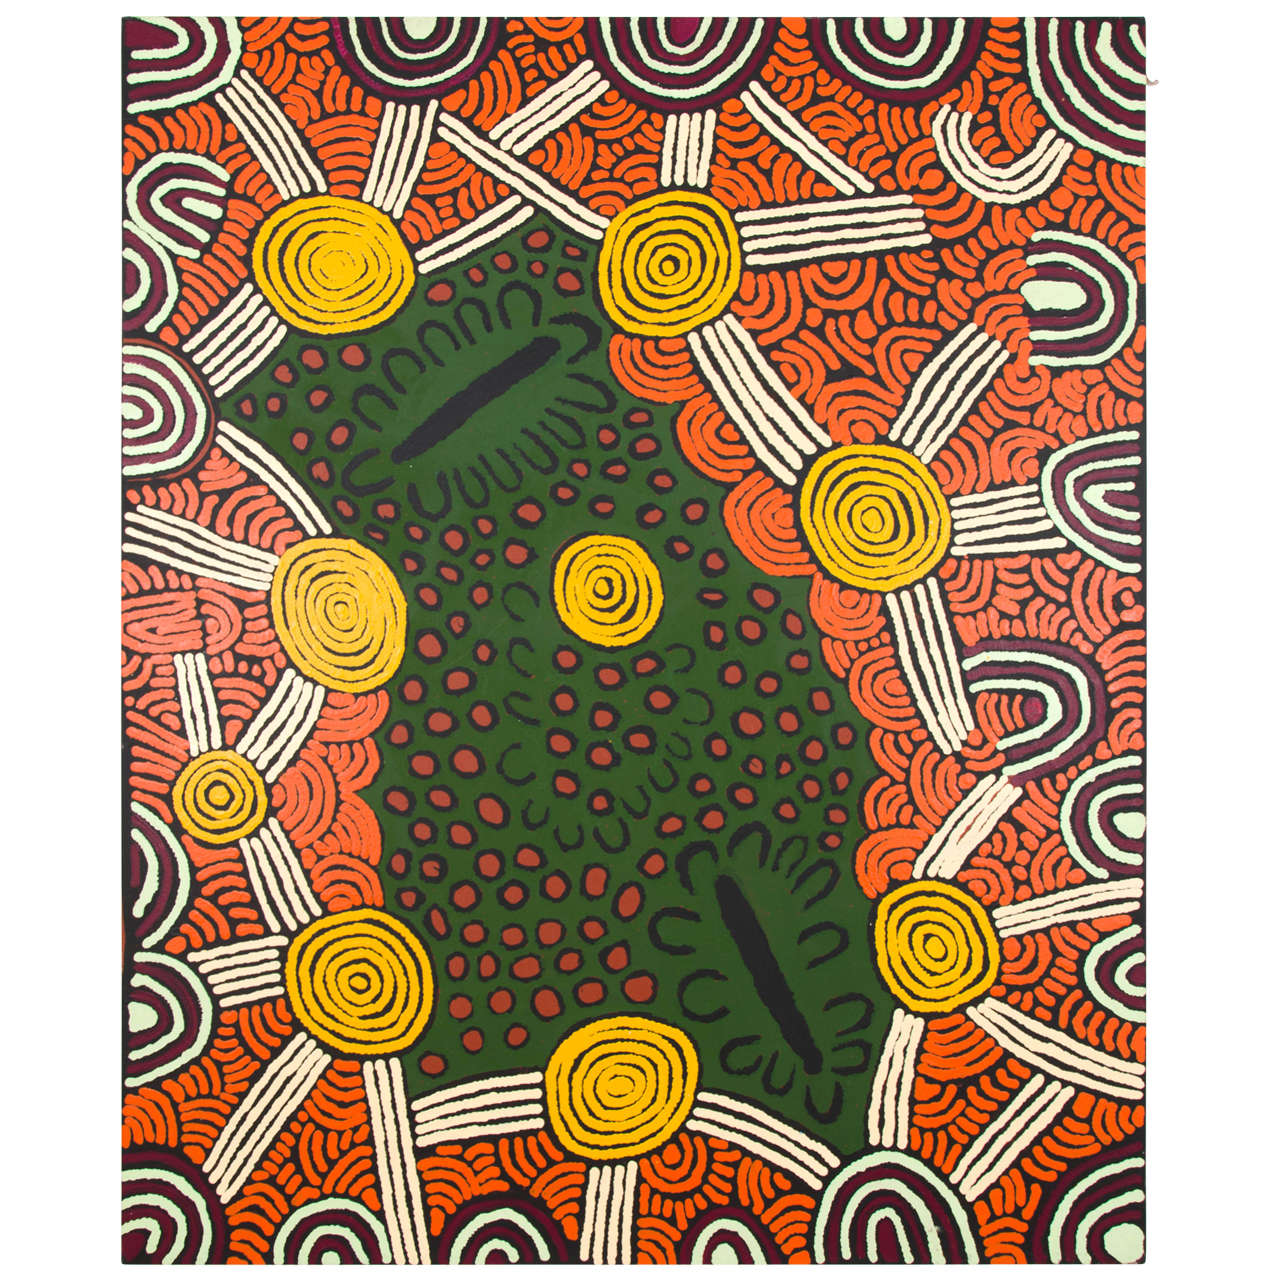 Large Colourful Aboriginal Australian Acrylic Painting For Sale